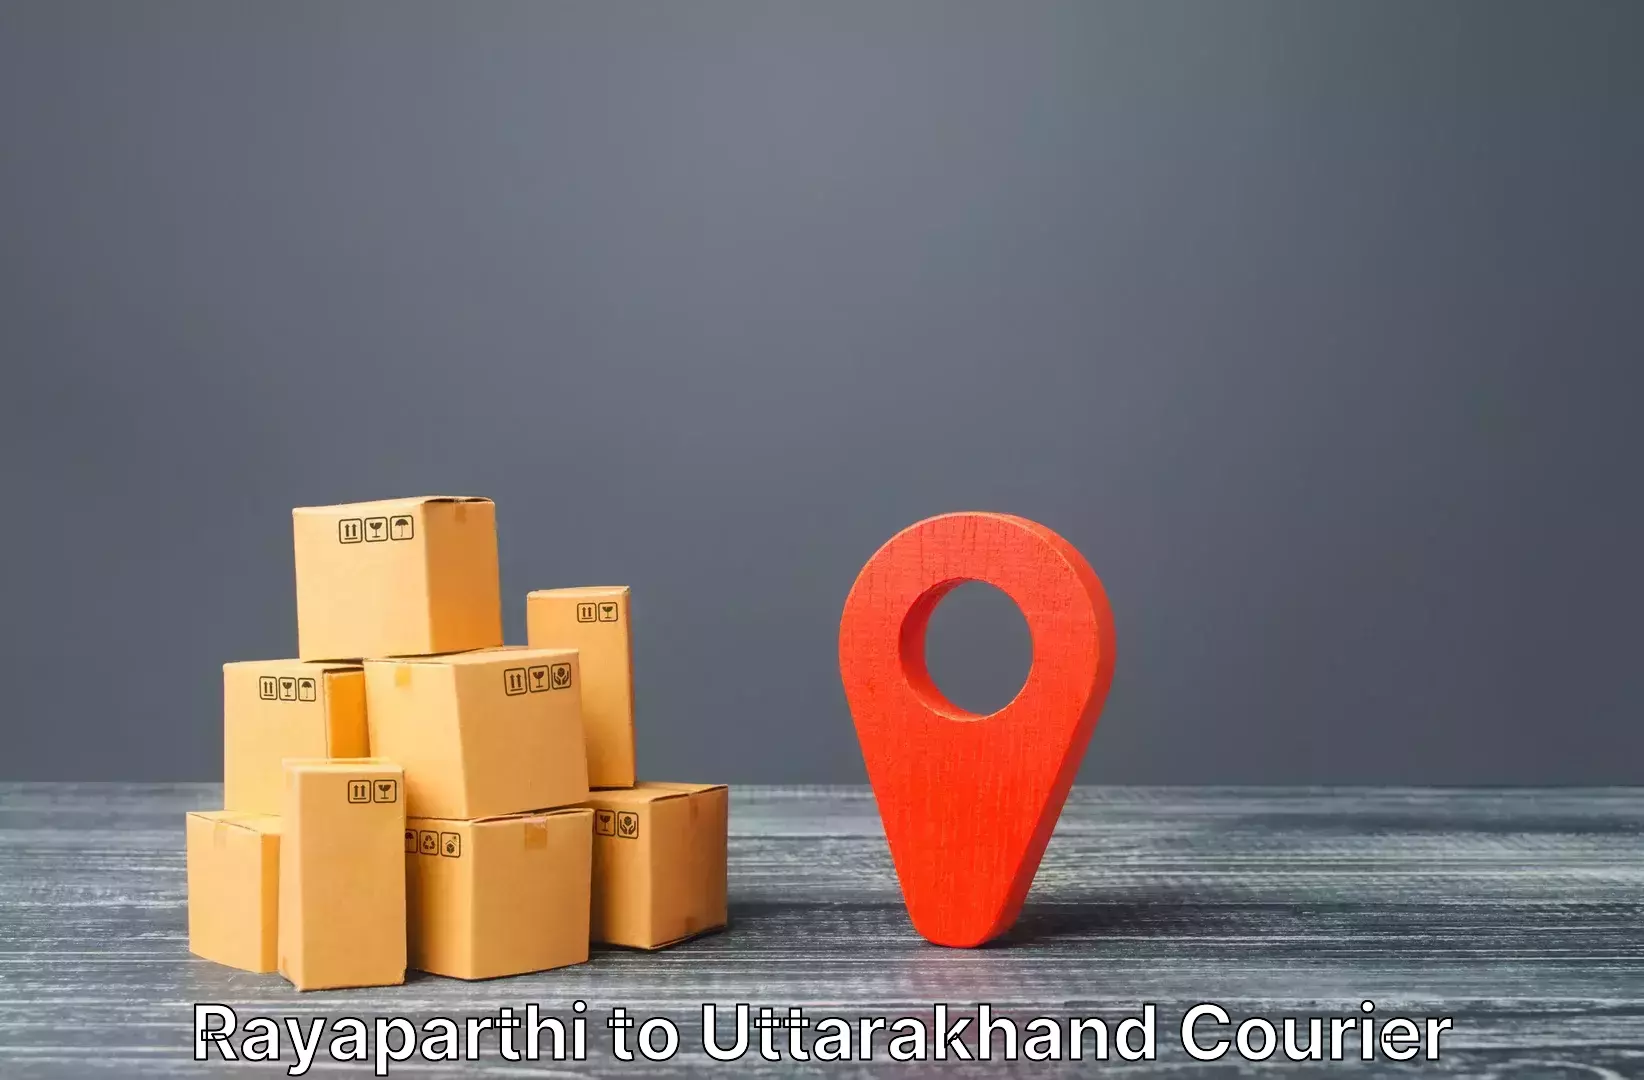 Luggage storage and delivery Rayaparthi to Herbertpur